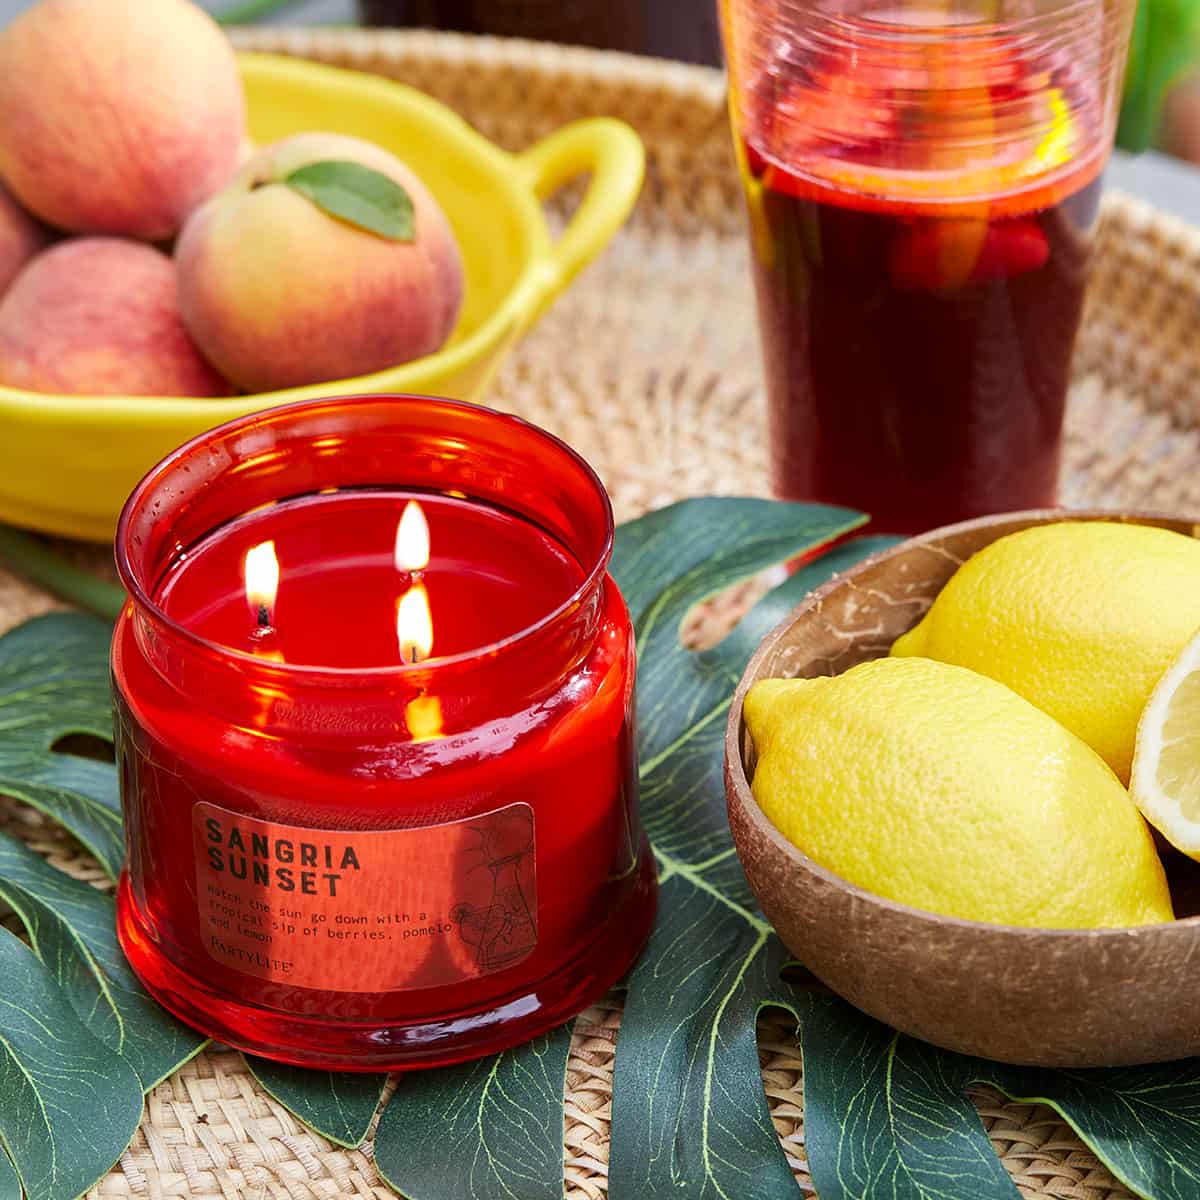 Sangria Sunset 3 Wick Jar Candle - PartyLite US